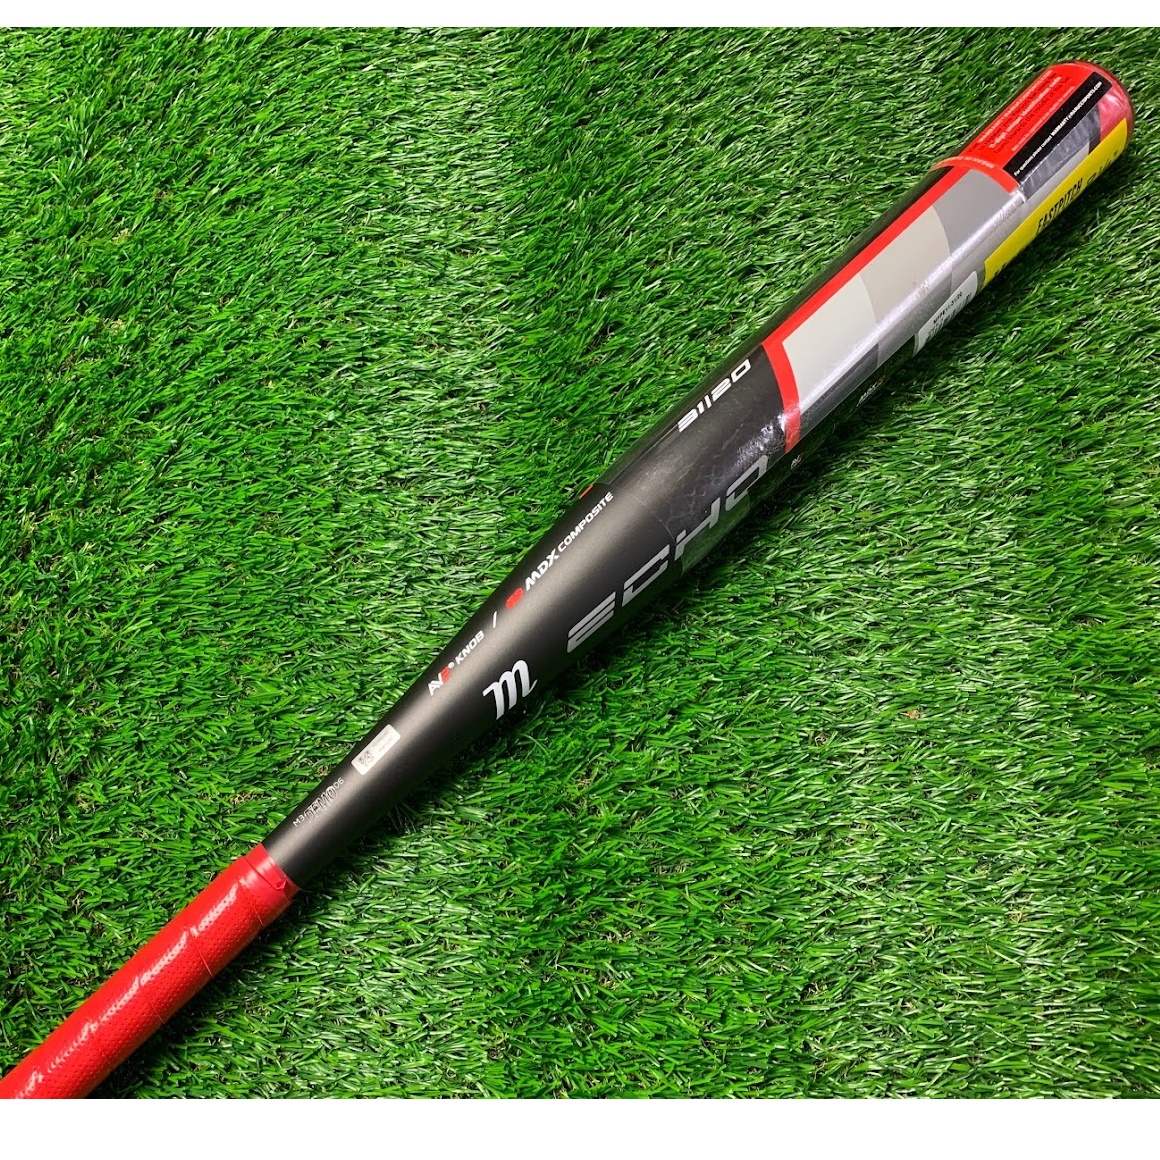 marucci-echo-fast-pitch-softball-bat-31-inch-20-oz-demo MFPE11-3120-DEMO Marucci  Demo bats are a great opportunity to pick up a high